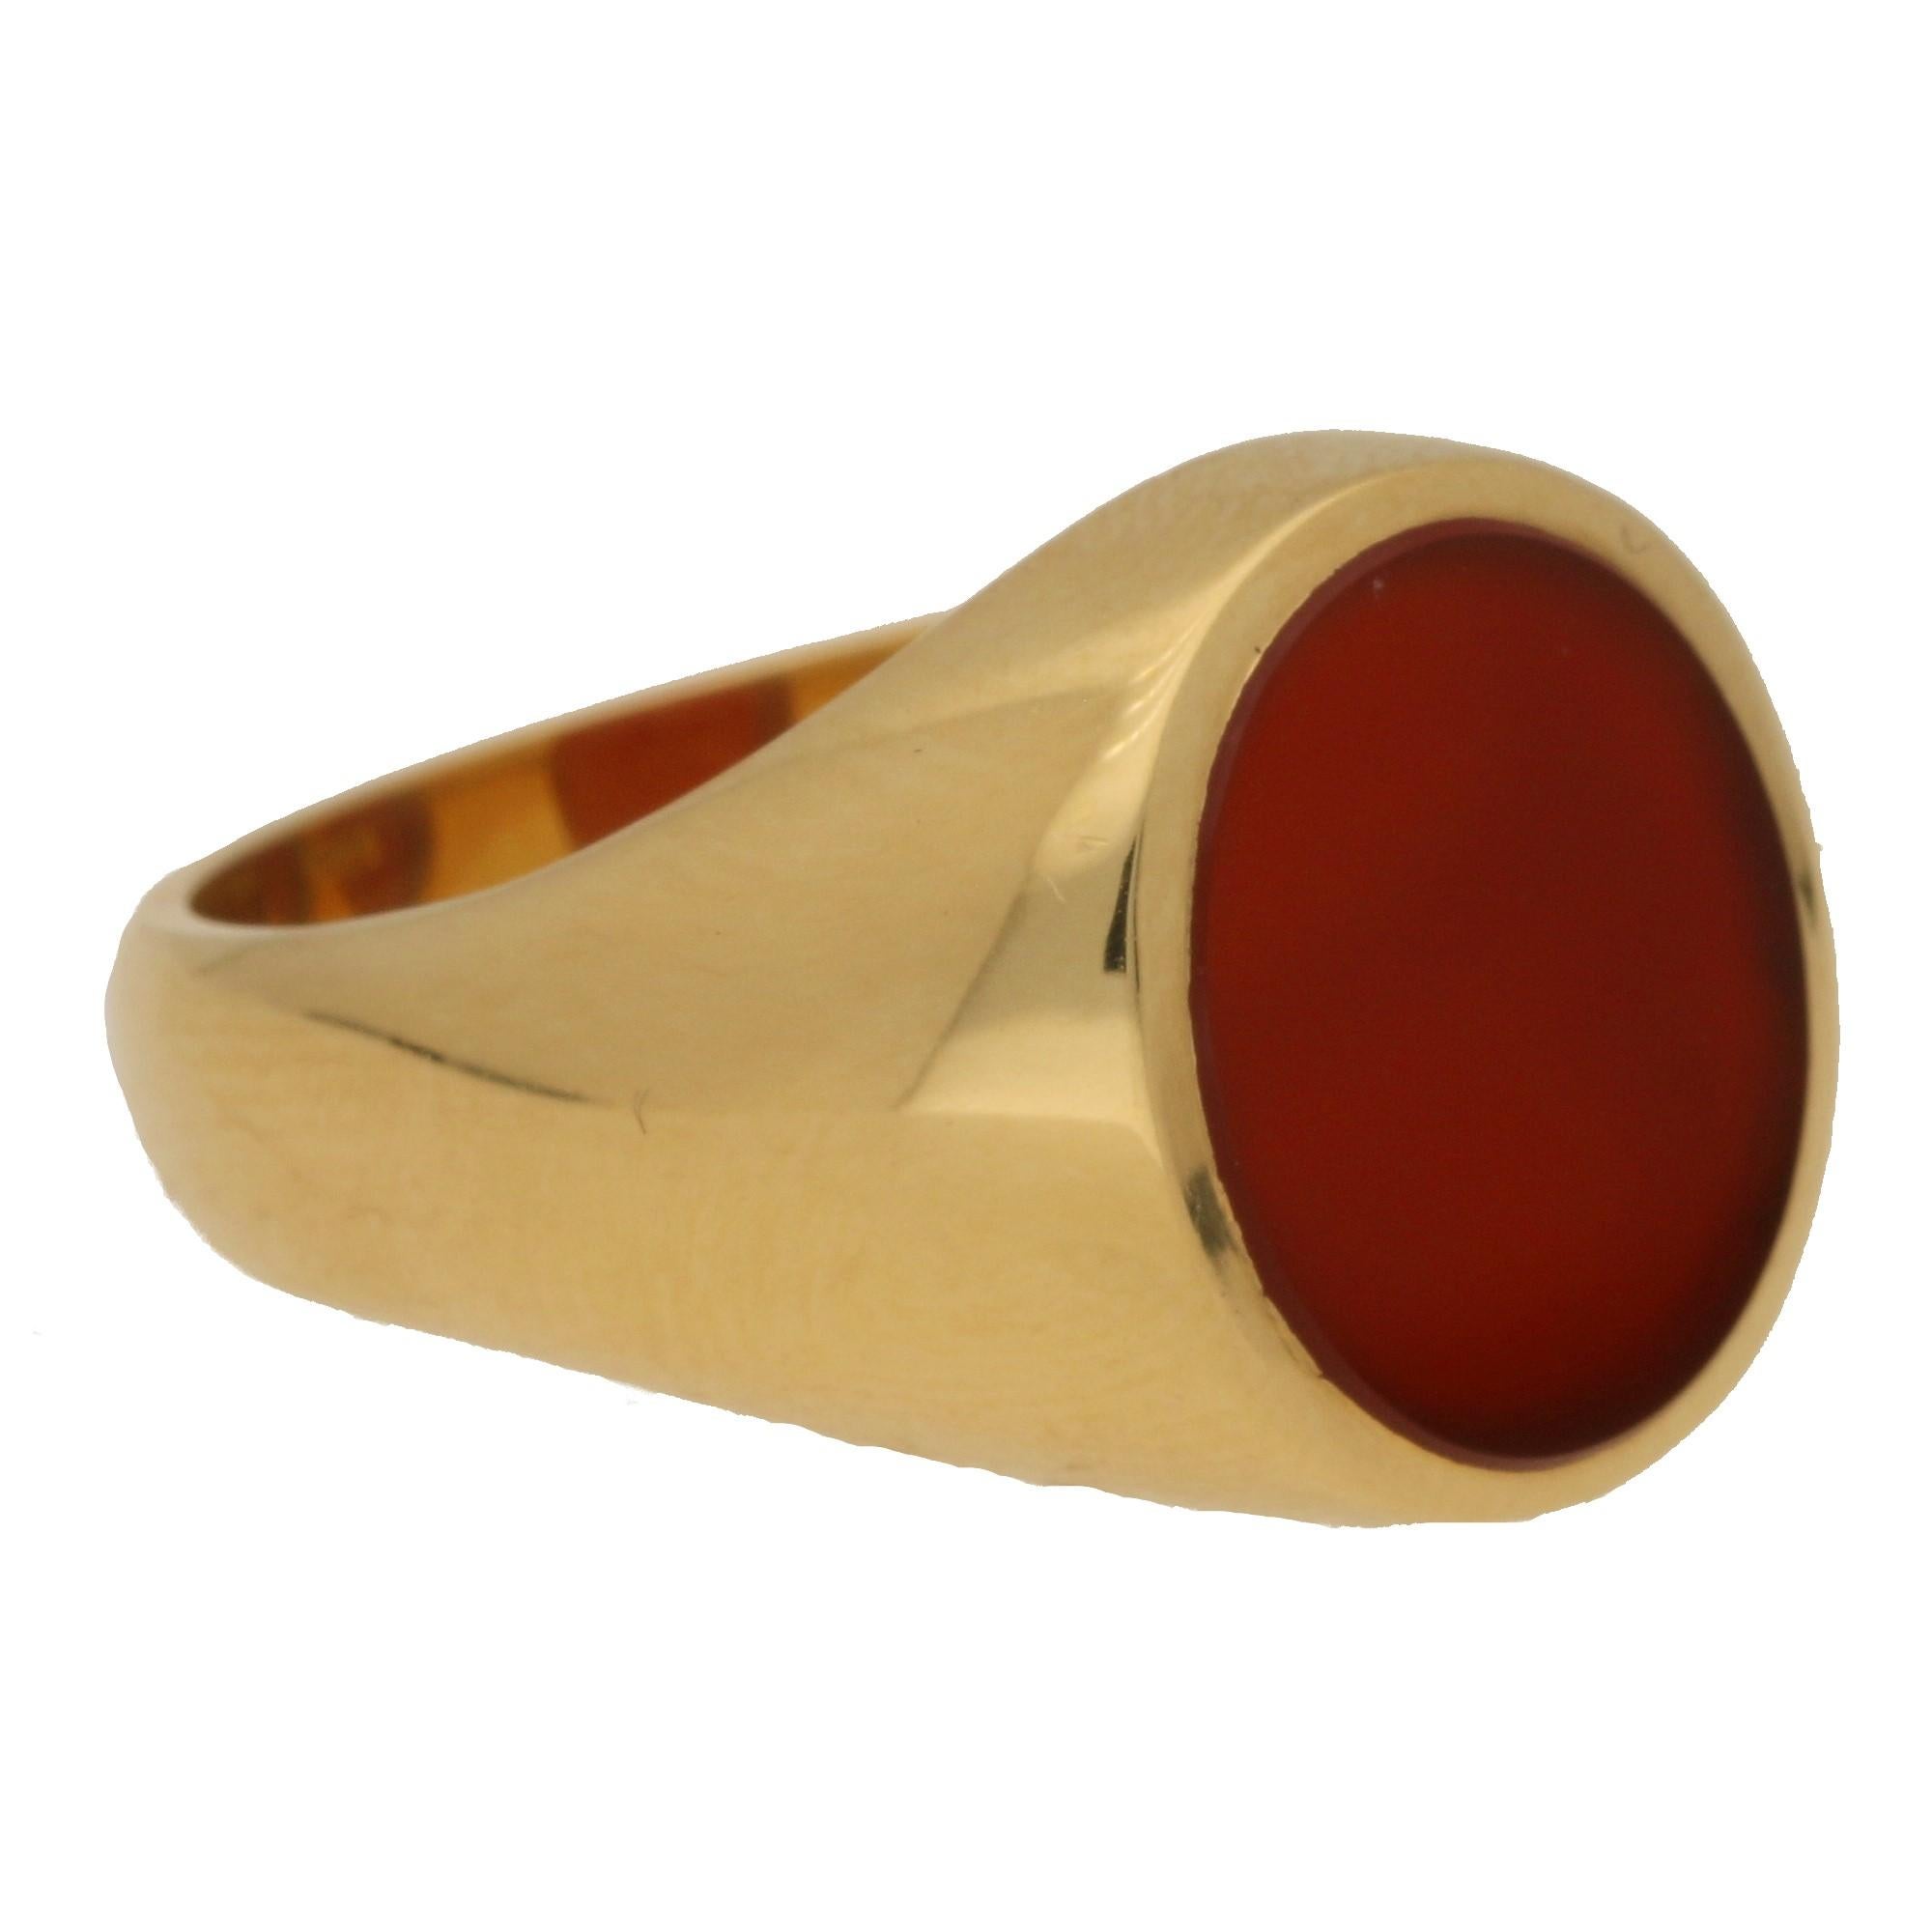 A striking oval signet ring set with an orange-brown coloured carnelian stone made of solid 18k yellow gold.

The ring head measures approximately 12 x 10mm and the stone has been left bare so that the wearer has the option to customise it in the